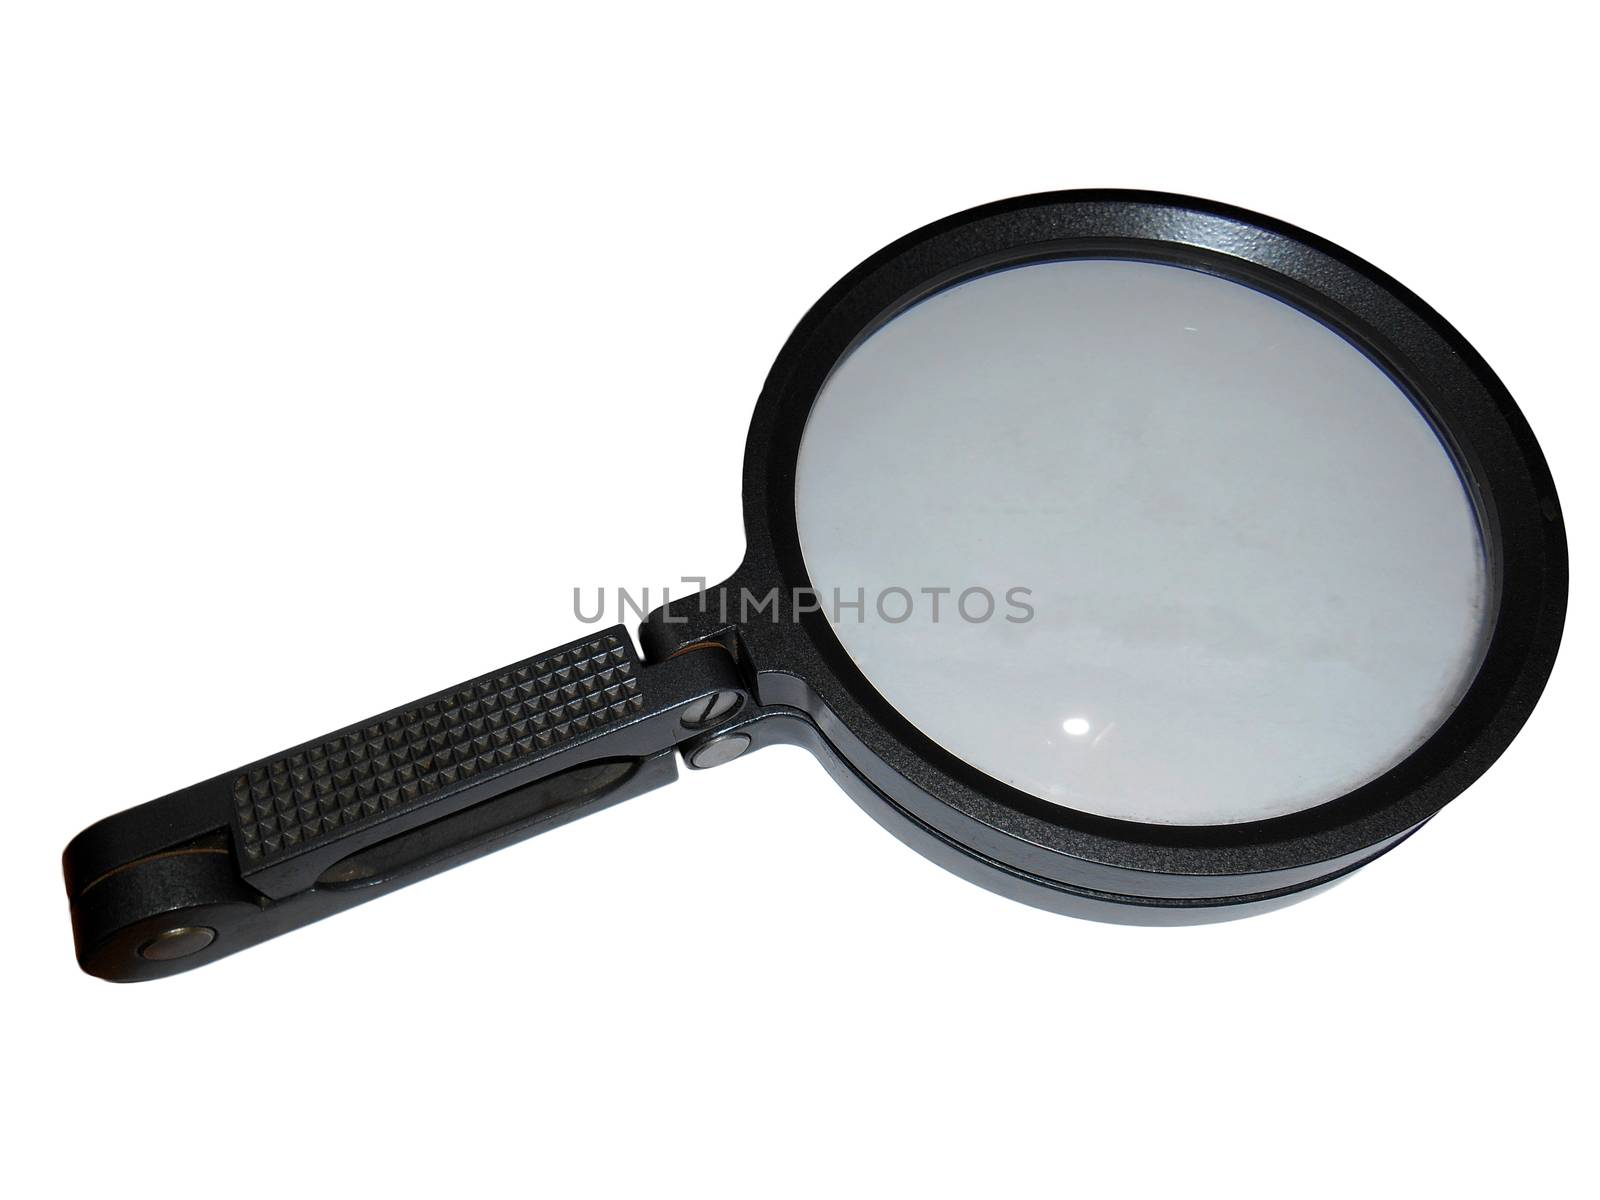 Magnifying glass, isolated on white.

Picture taken on November 22, 2014.